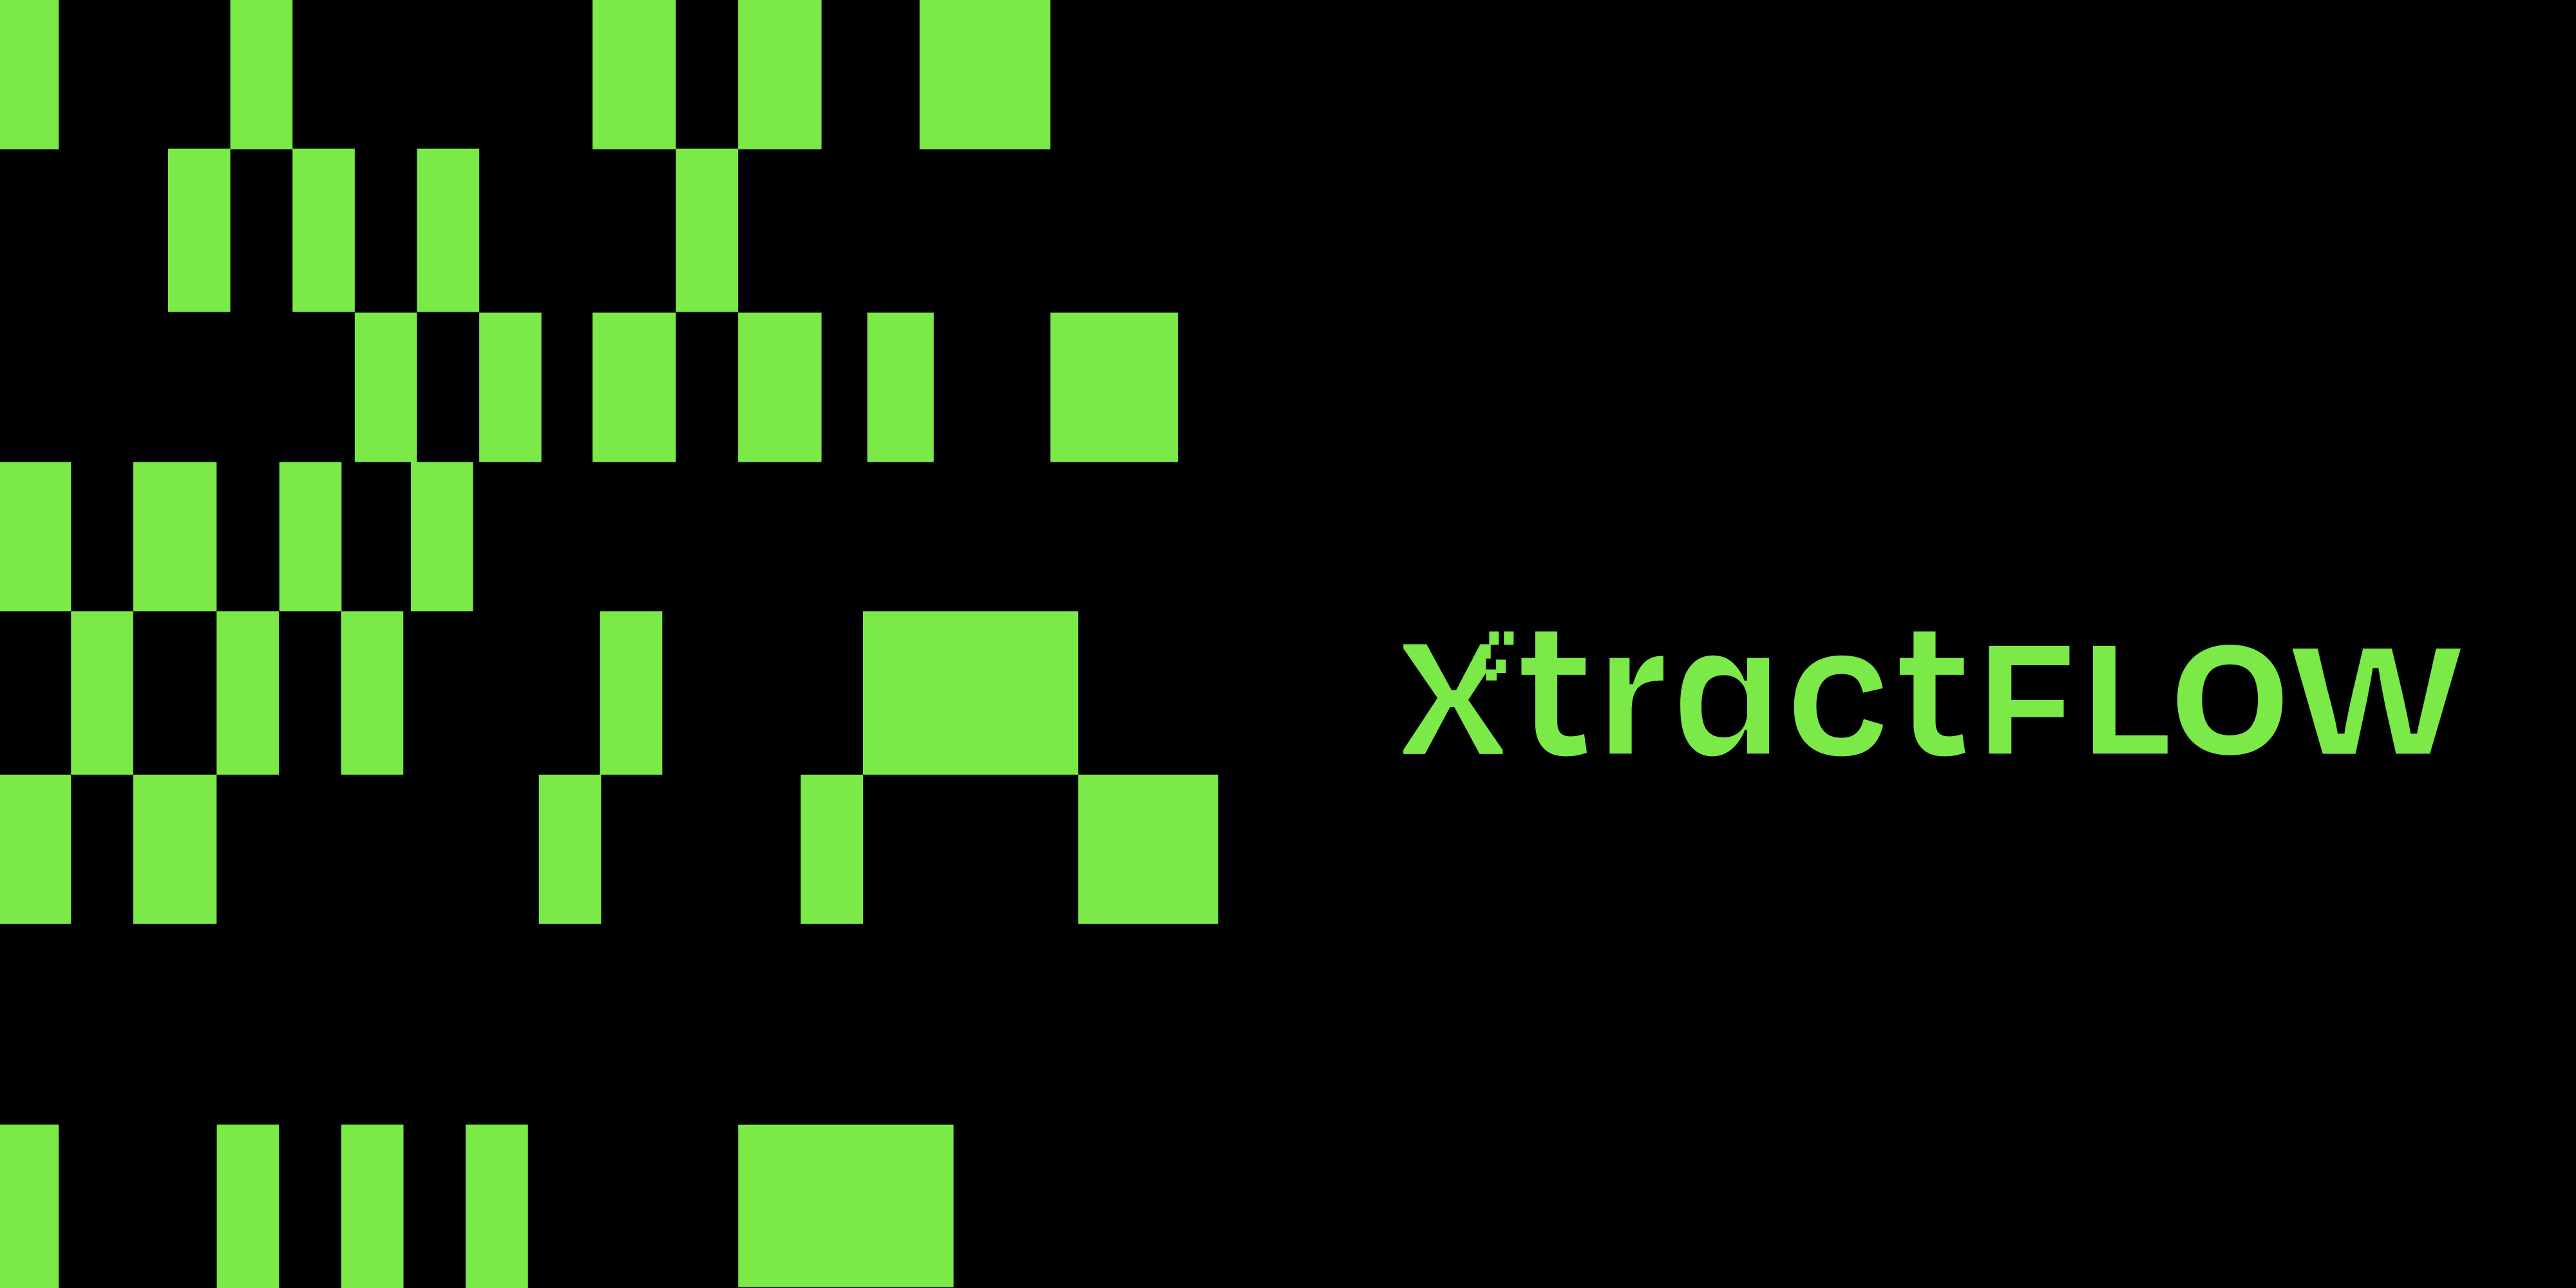 Illustration: XtractFlow: Using Generative AI to Make a Quantum Leap in Intelligent Document Processing